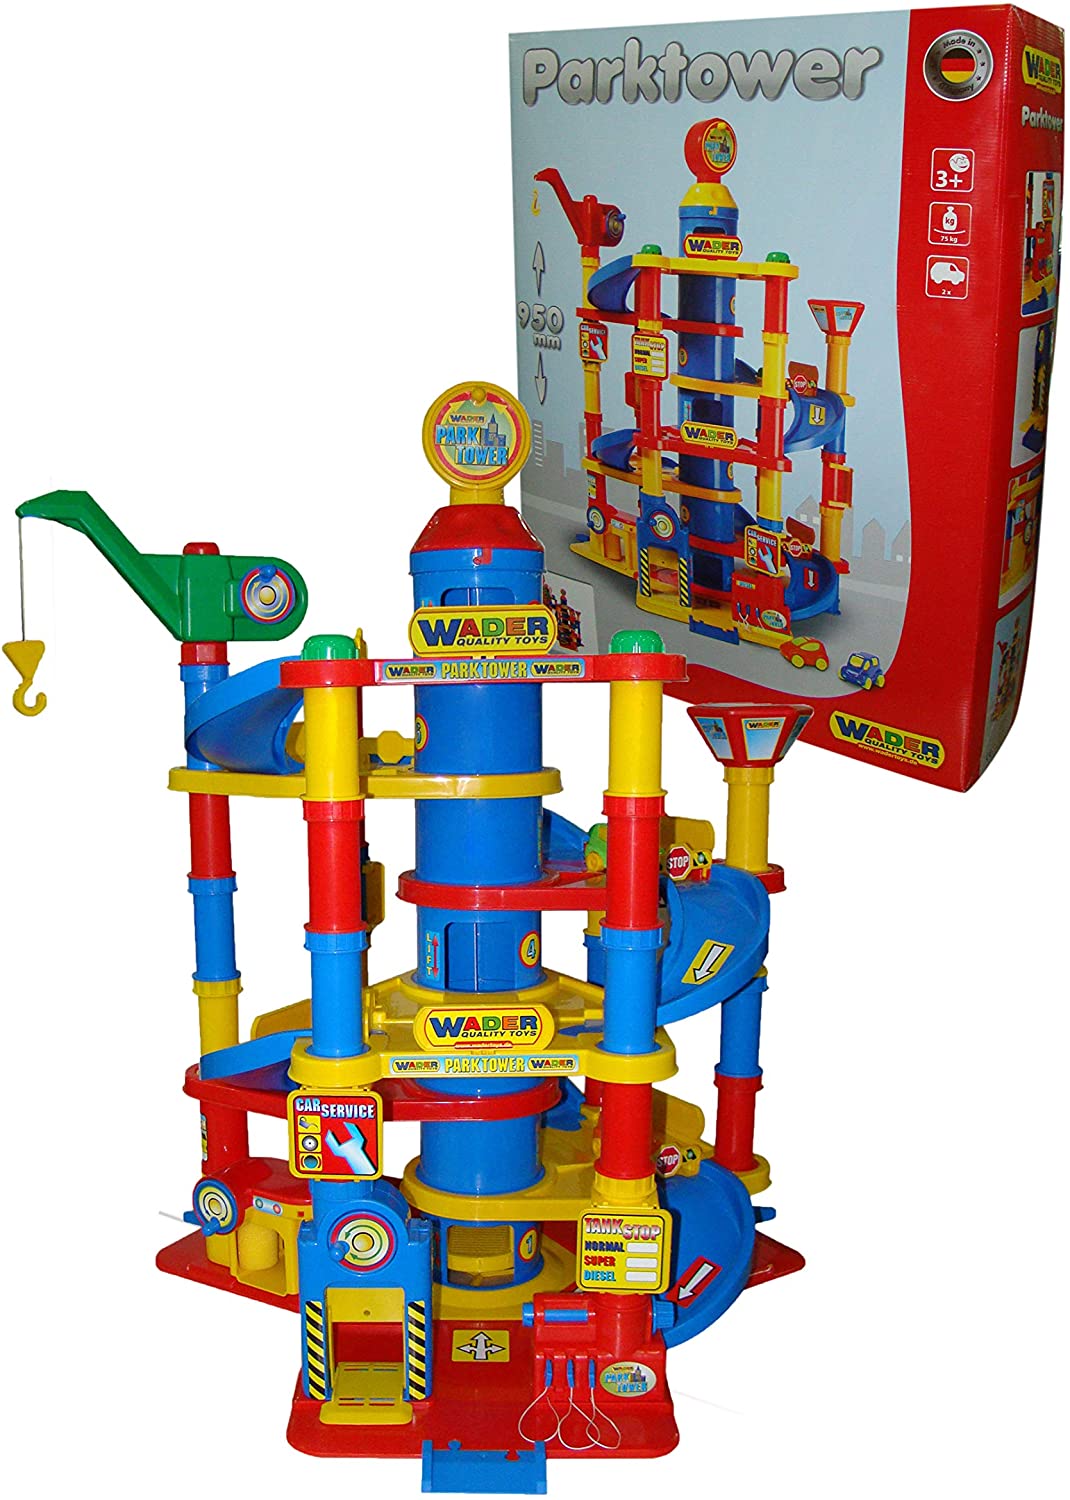 Wader Quality Toys Wader, 7 Tier Tower Washer,, 59 x 77 cm – toy Parking Garage Petrol Station